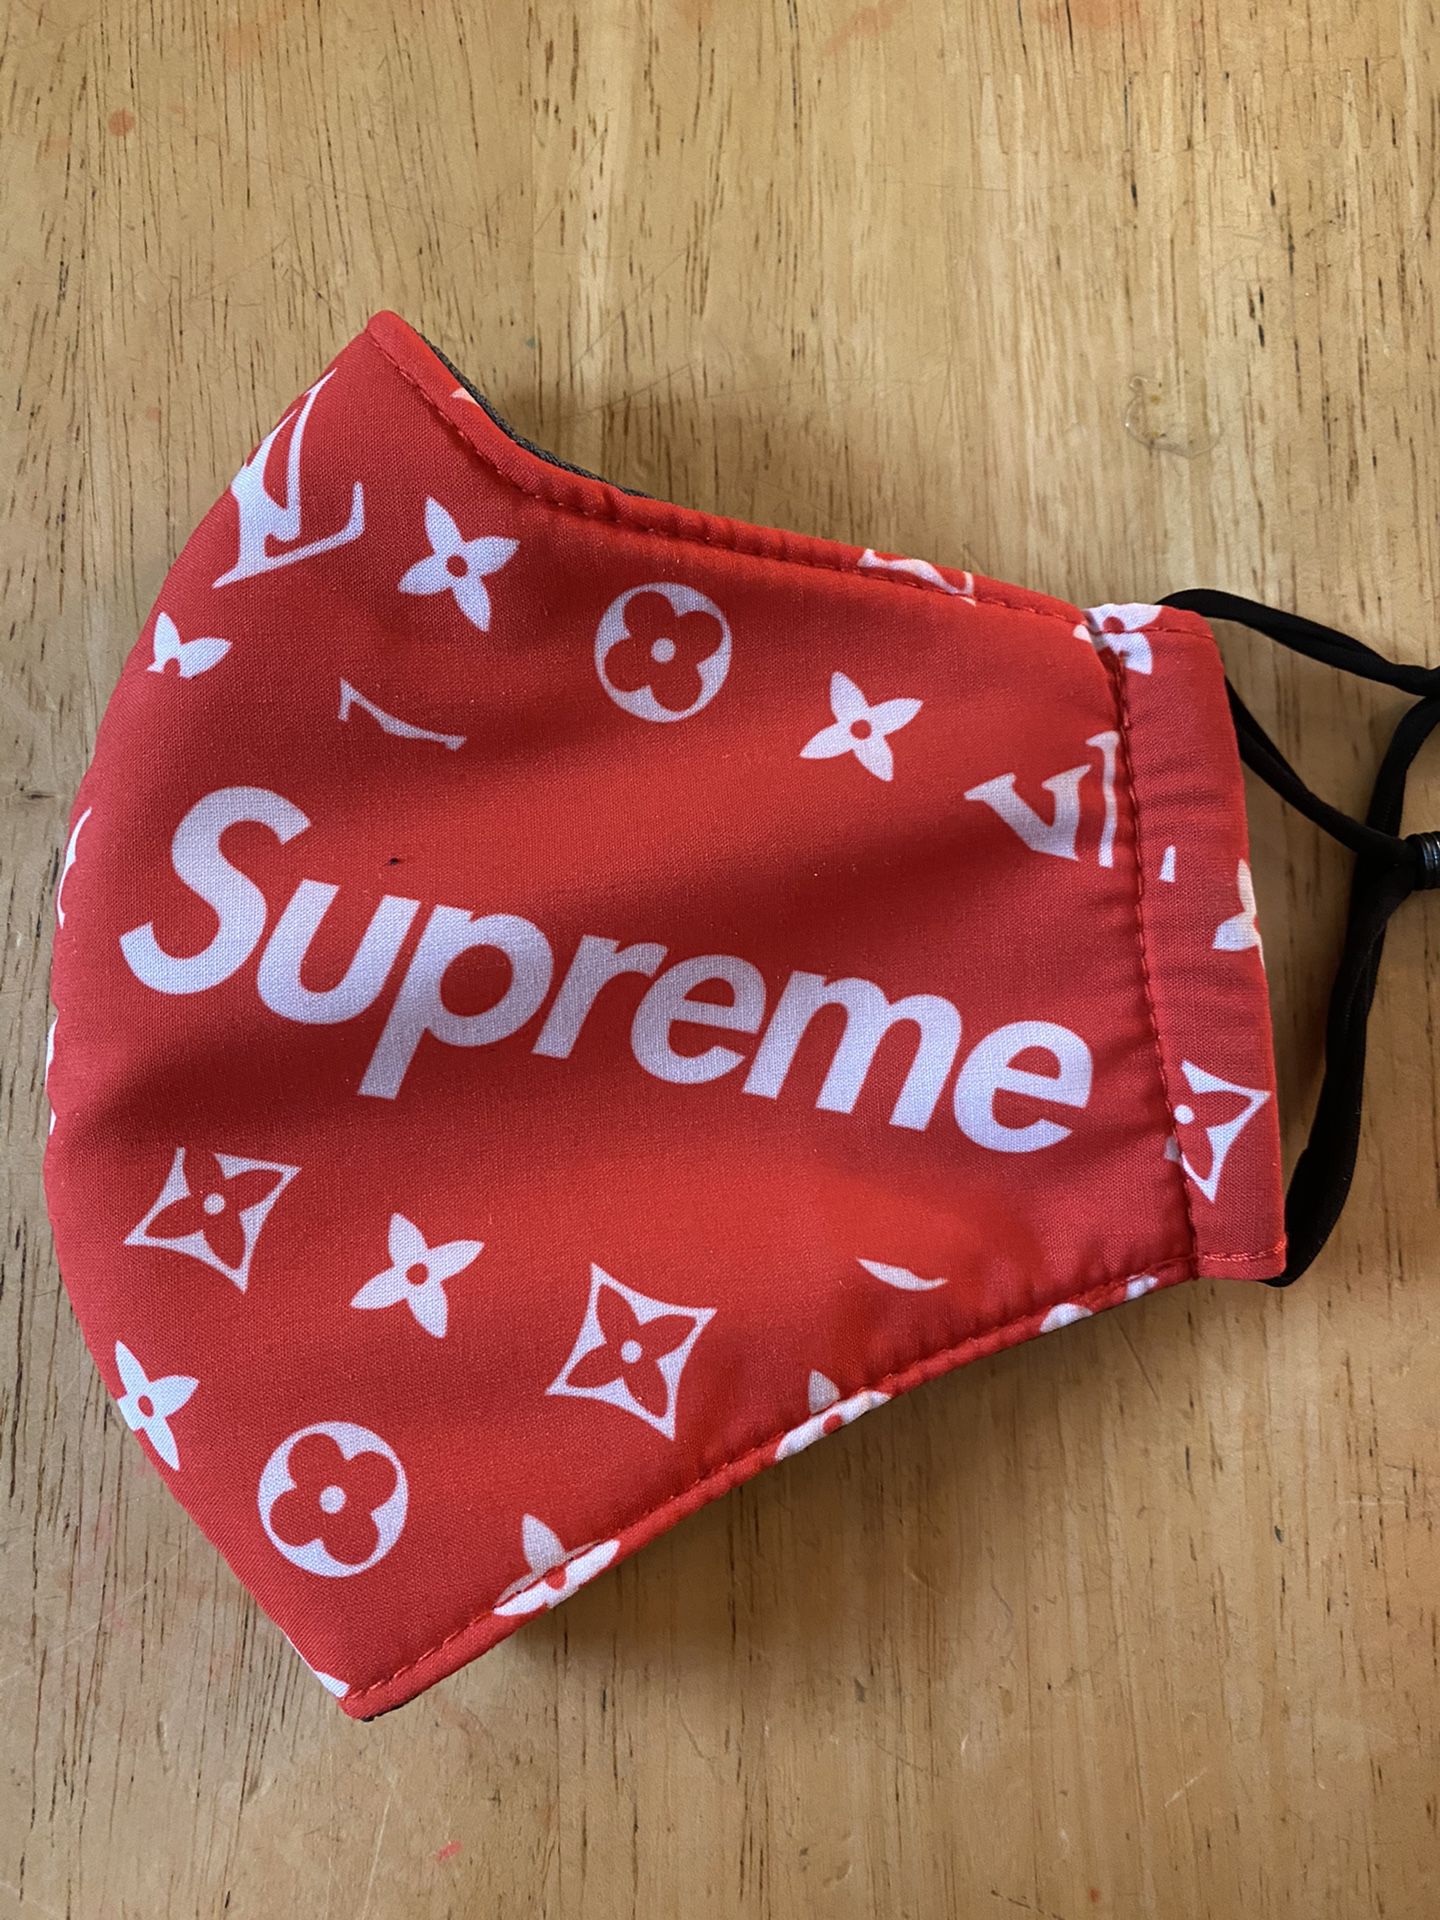 Supreme Face Mask for Sale in Phoenix, AZ - OfferUp